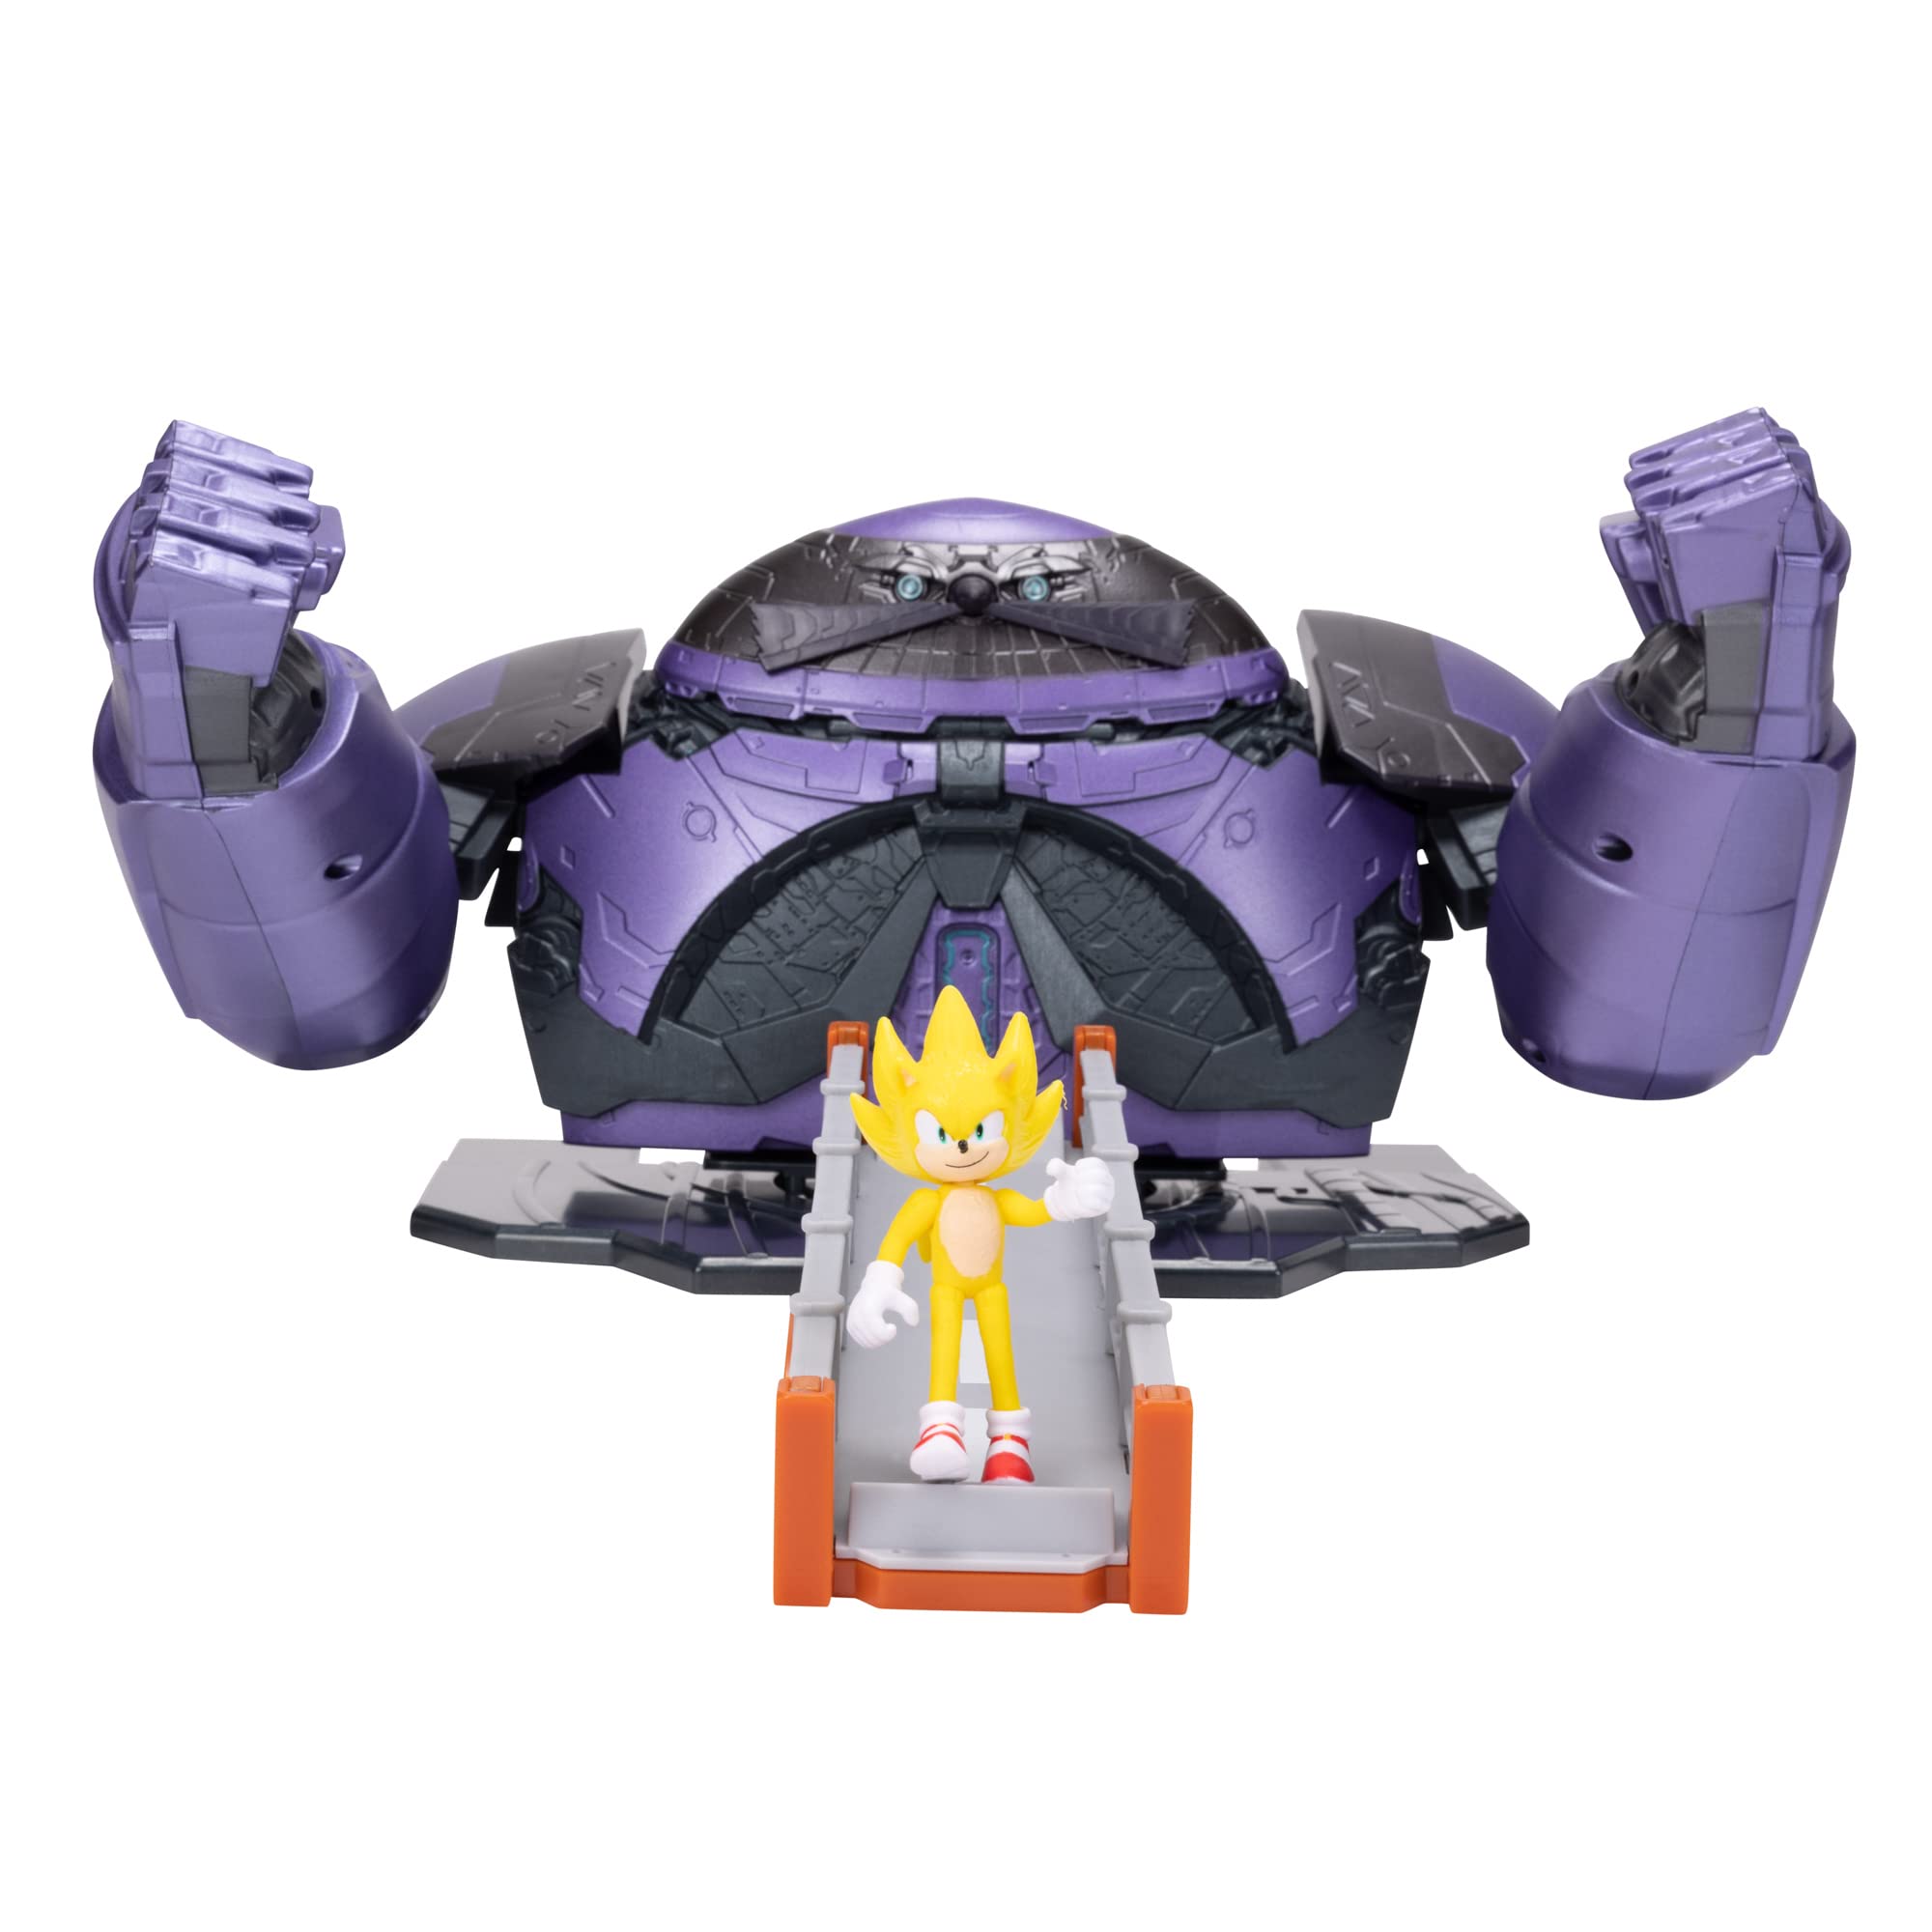 Sonic the Hedgehog 2 Movie: Giant Eggman Battle Playset w/  2.5" Super Sonic Action Figure  $11.48 + Free Shipping w/ Prime or on $35+